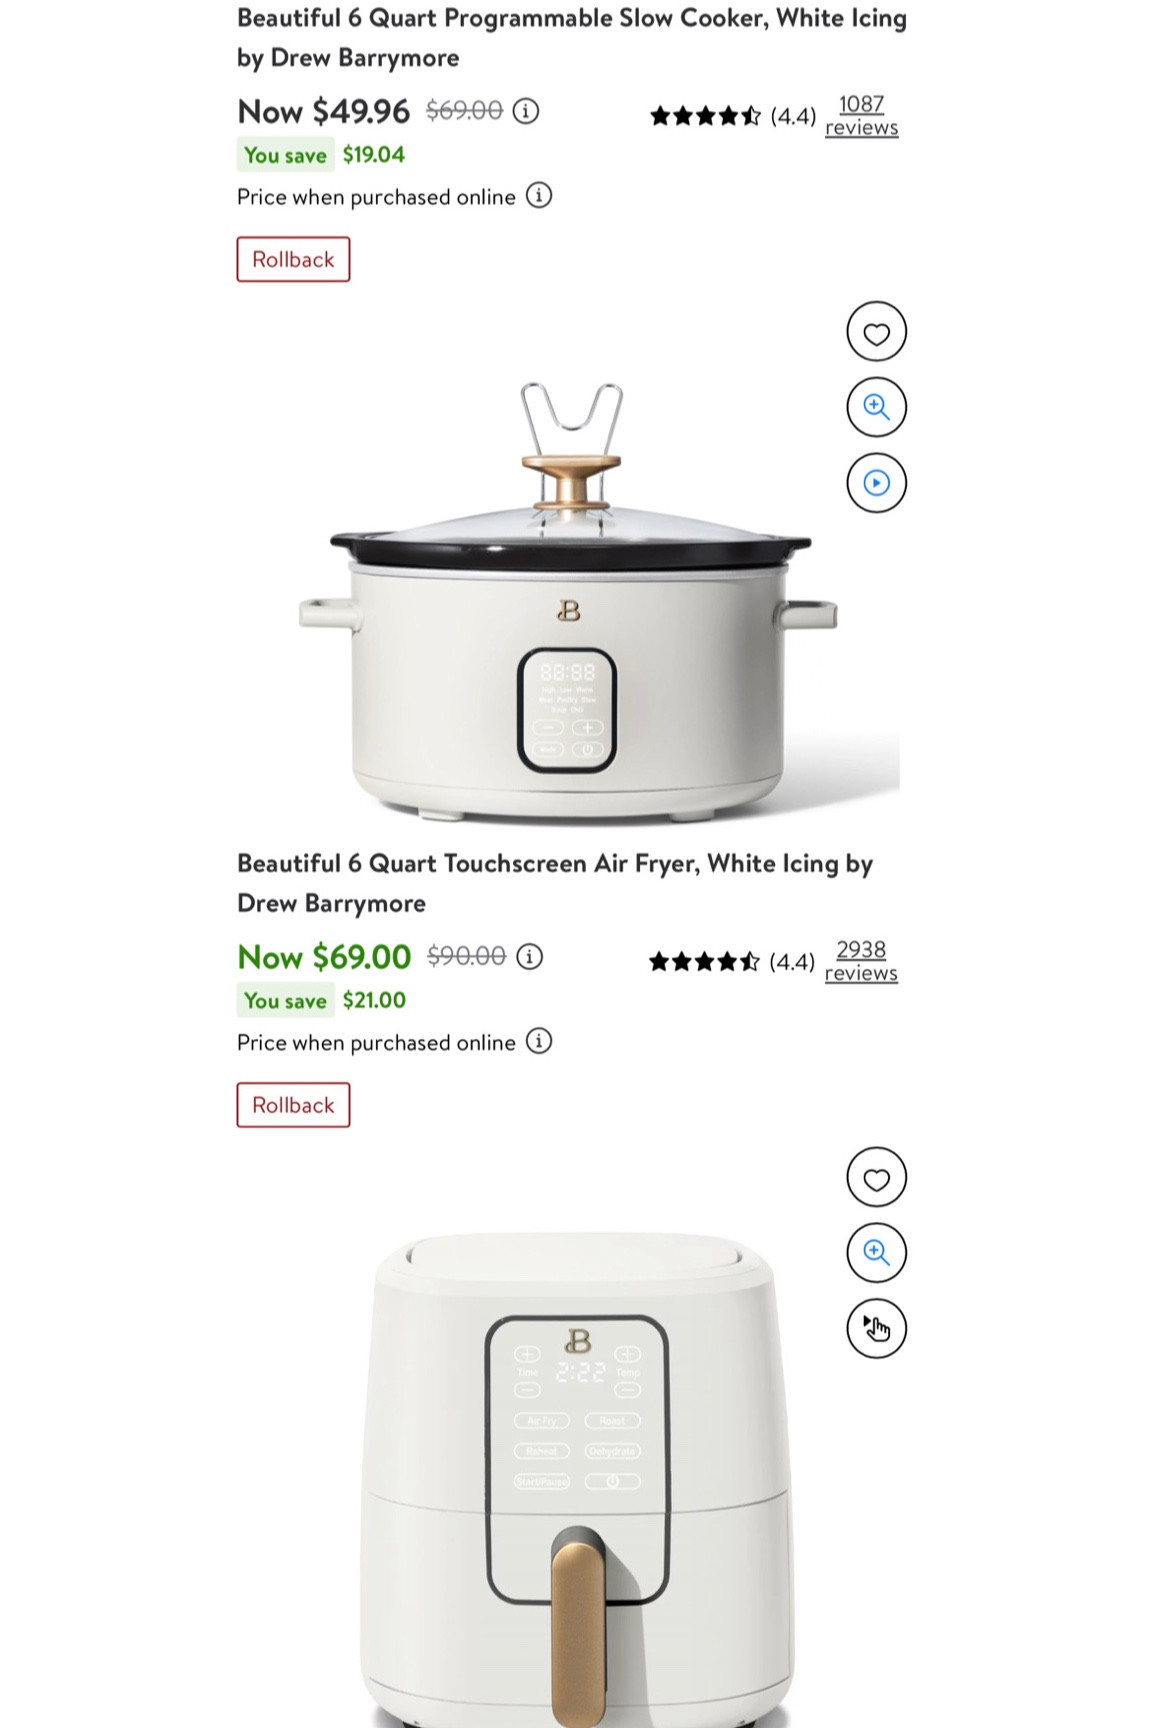 Beautiful 6 Quart Programmable Slow Cooker, White Icing by Drew